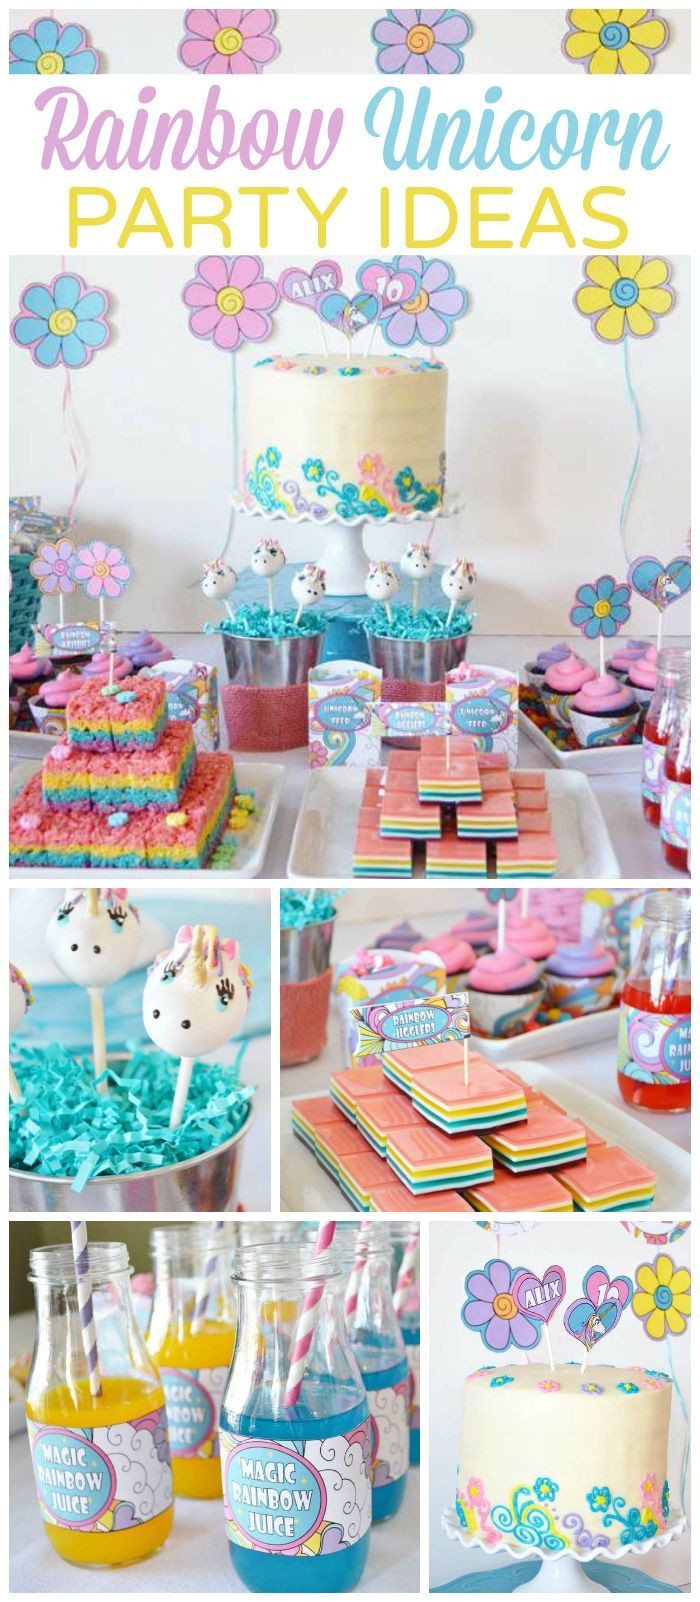 Unicorn And Rainbow Party Ideas
 This rainbow and unicorn party is so girly and magical